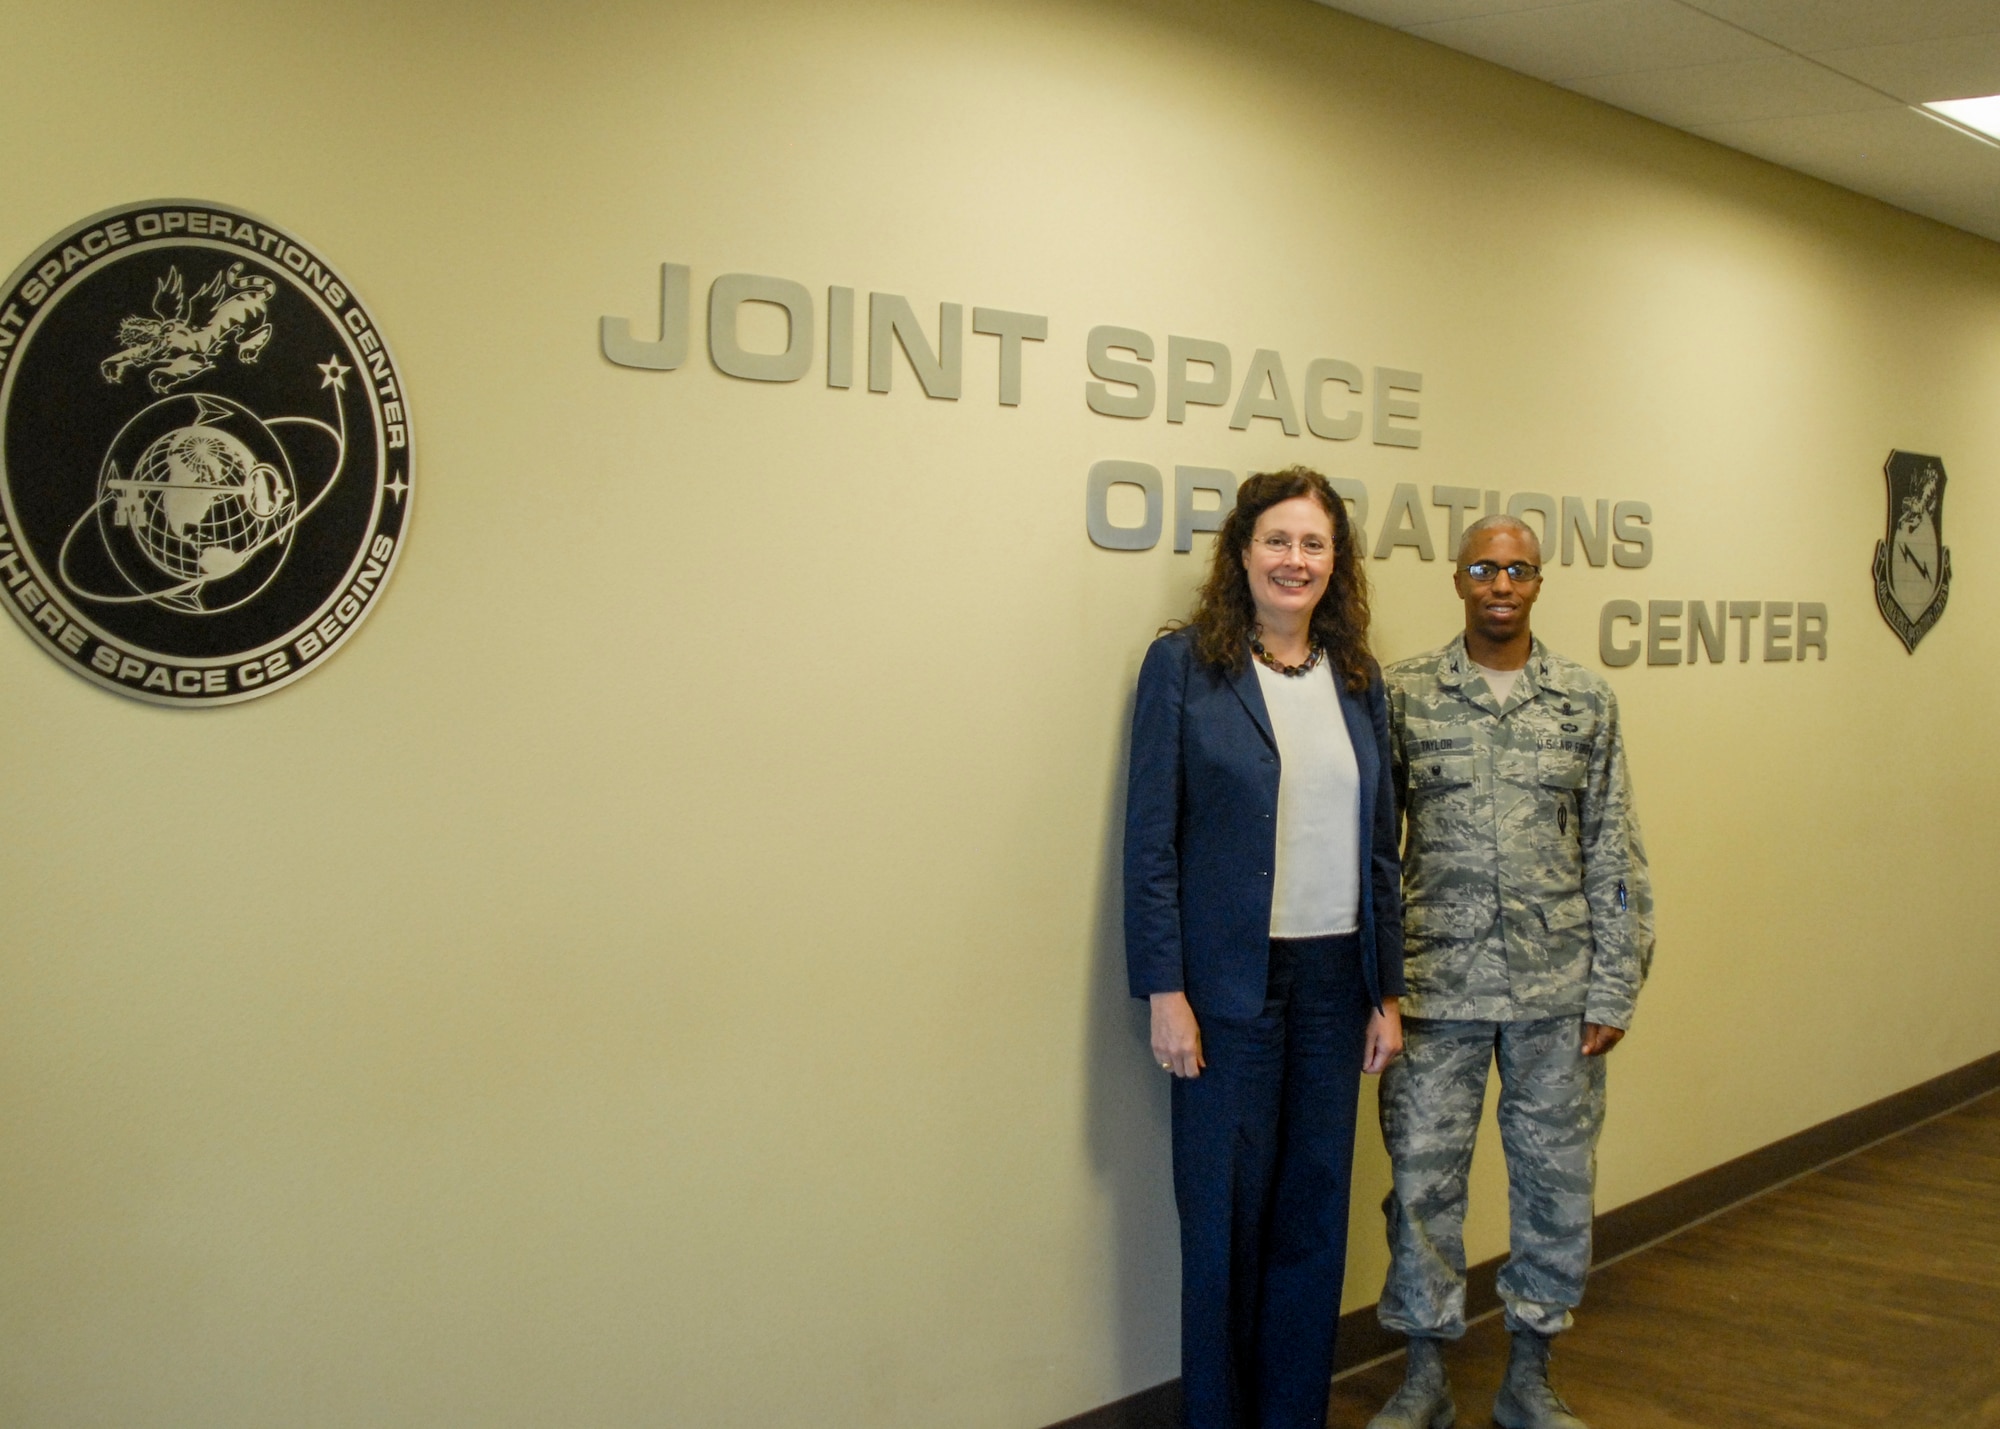 Dr. Merri Sanchez, Air Force Space Command Chief Scientist and Technical Advisor, poses for a photo with Col. Fred Taylor, deputy director, Joint Space Operations Center, Vandenberg Air Force Base, Calif., during a visit, here, May 1, 2015.  In addition to the JSpOC, Sanchez visited facilities operated by Joint Functional Component Command for Space, 14th Air Force (Air Forces Strategic) and the 30th Space Wing to gain insight into how AFSPC might better train and equip its personnel to accomplish vital space missions. (U.S. Air Force photo by Capt. Nicholas Mercurio/Released)